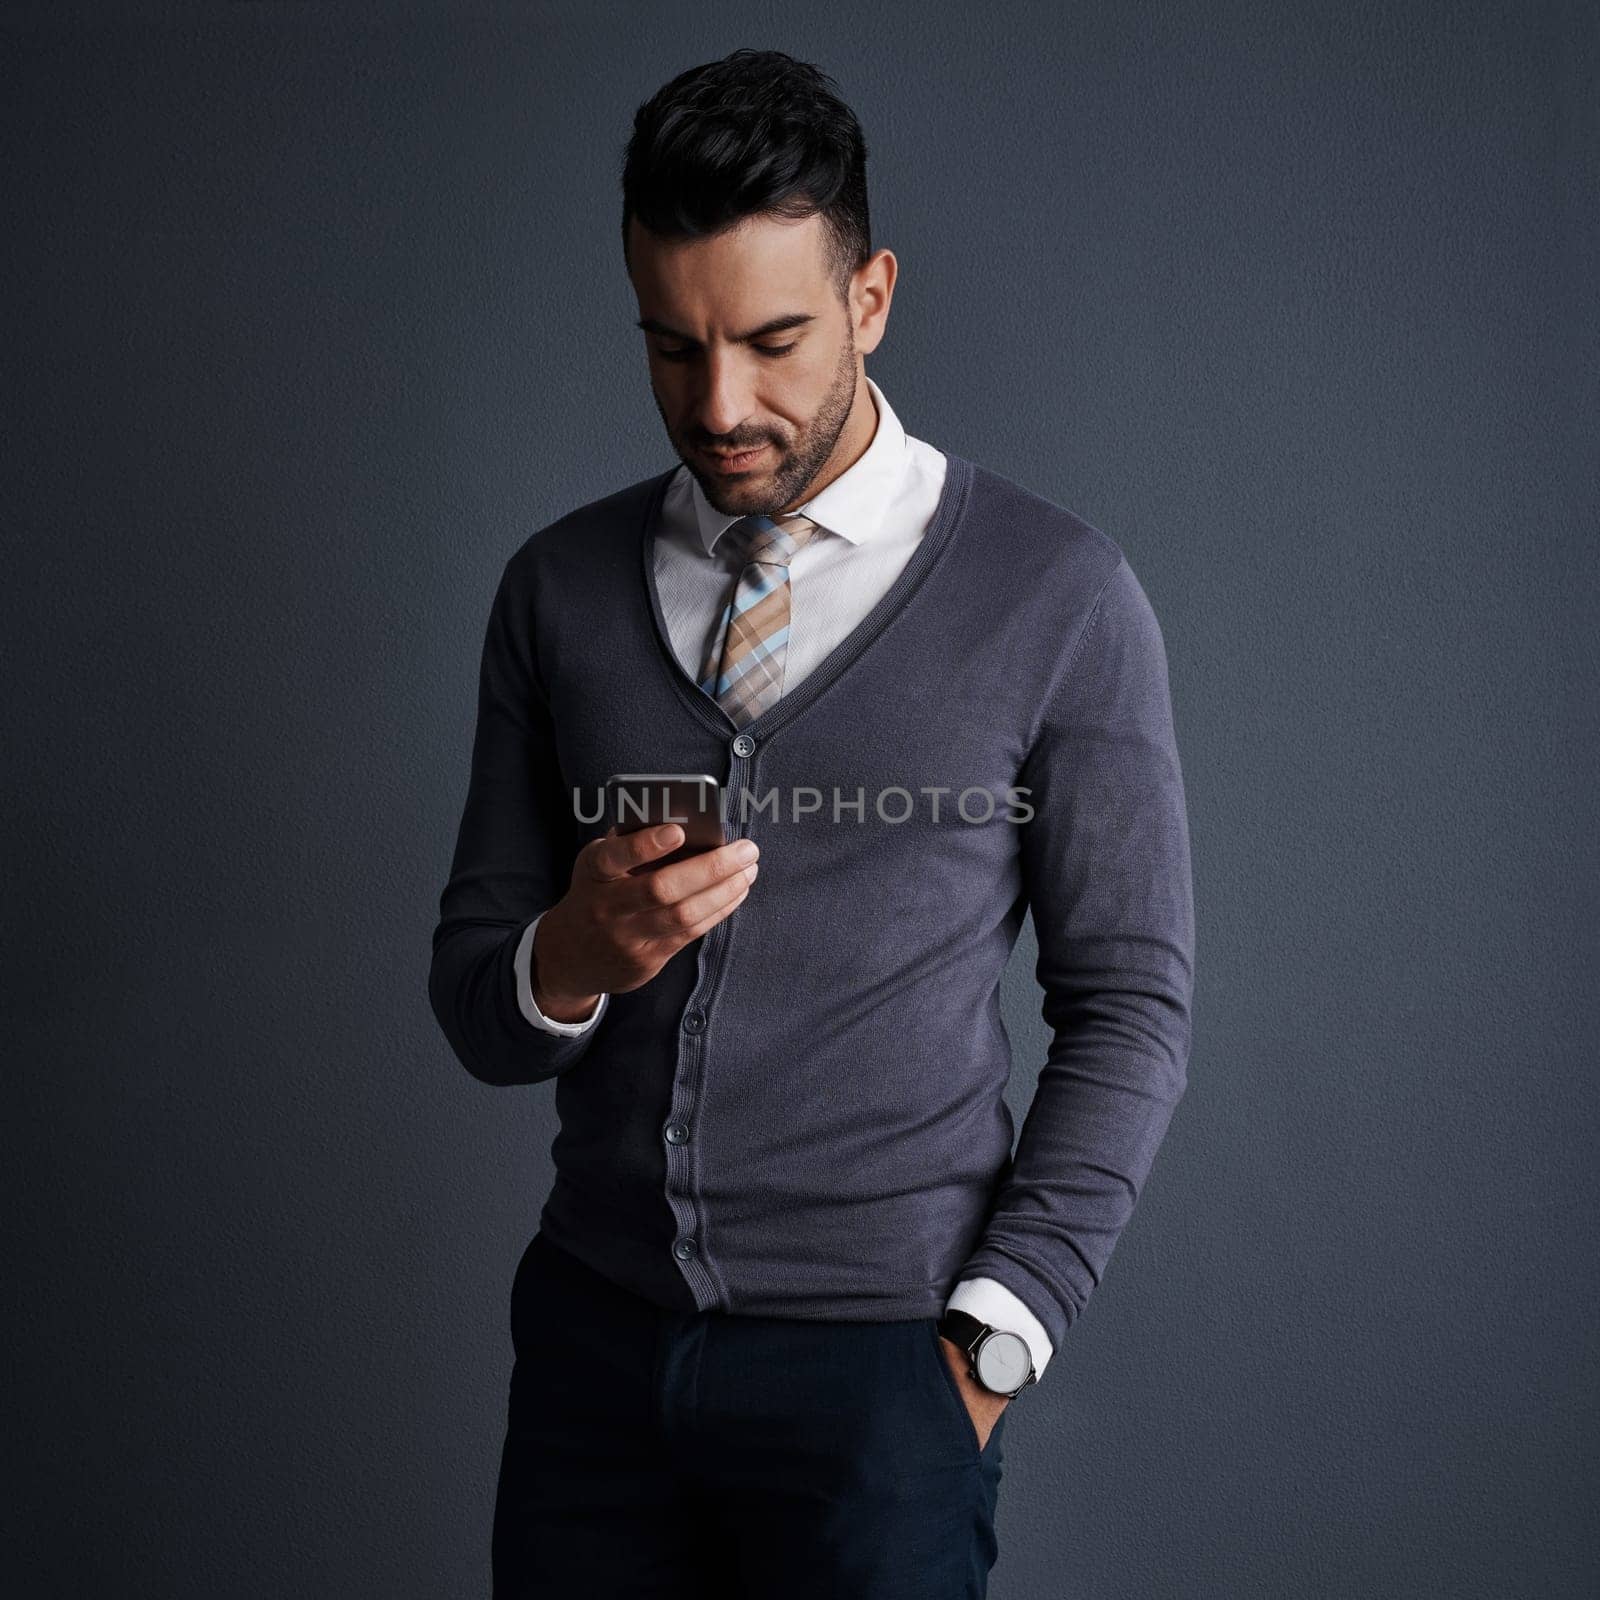 Getting work done in mobile format. Studio shot of a stylish young businessman using a mobile phone against a gray background